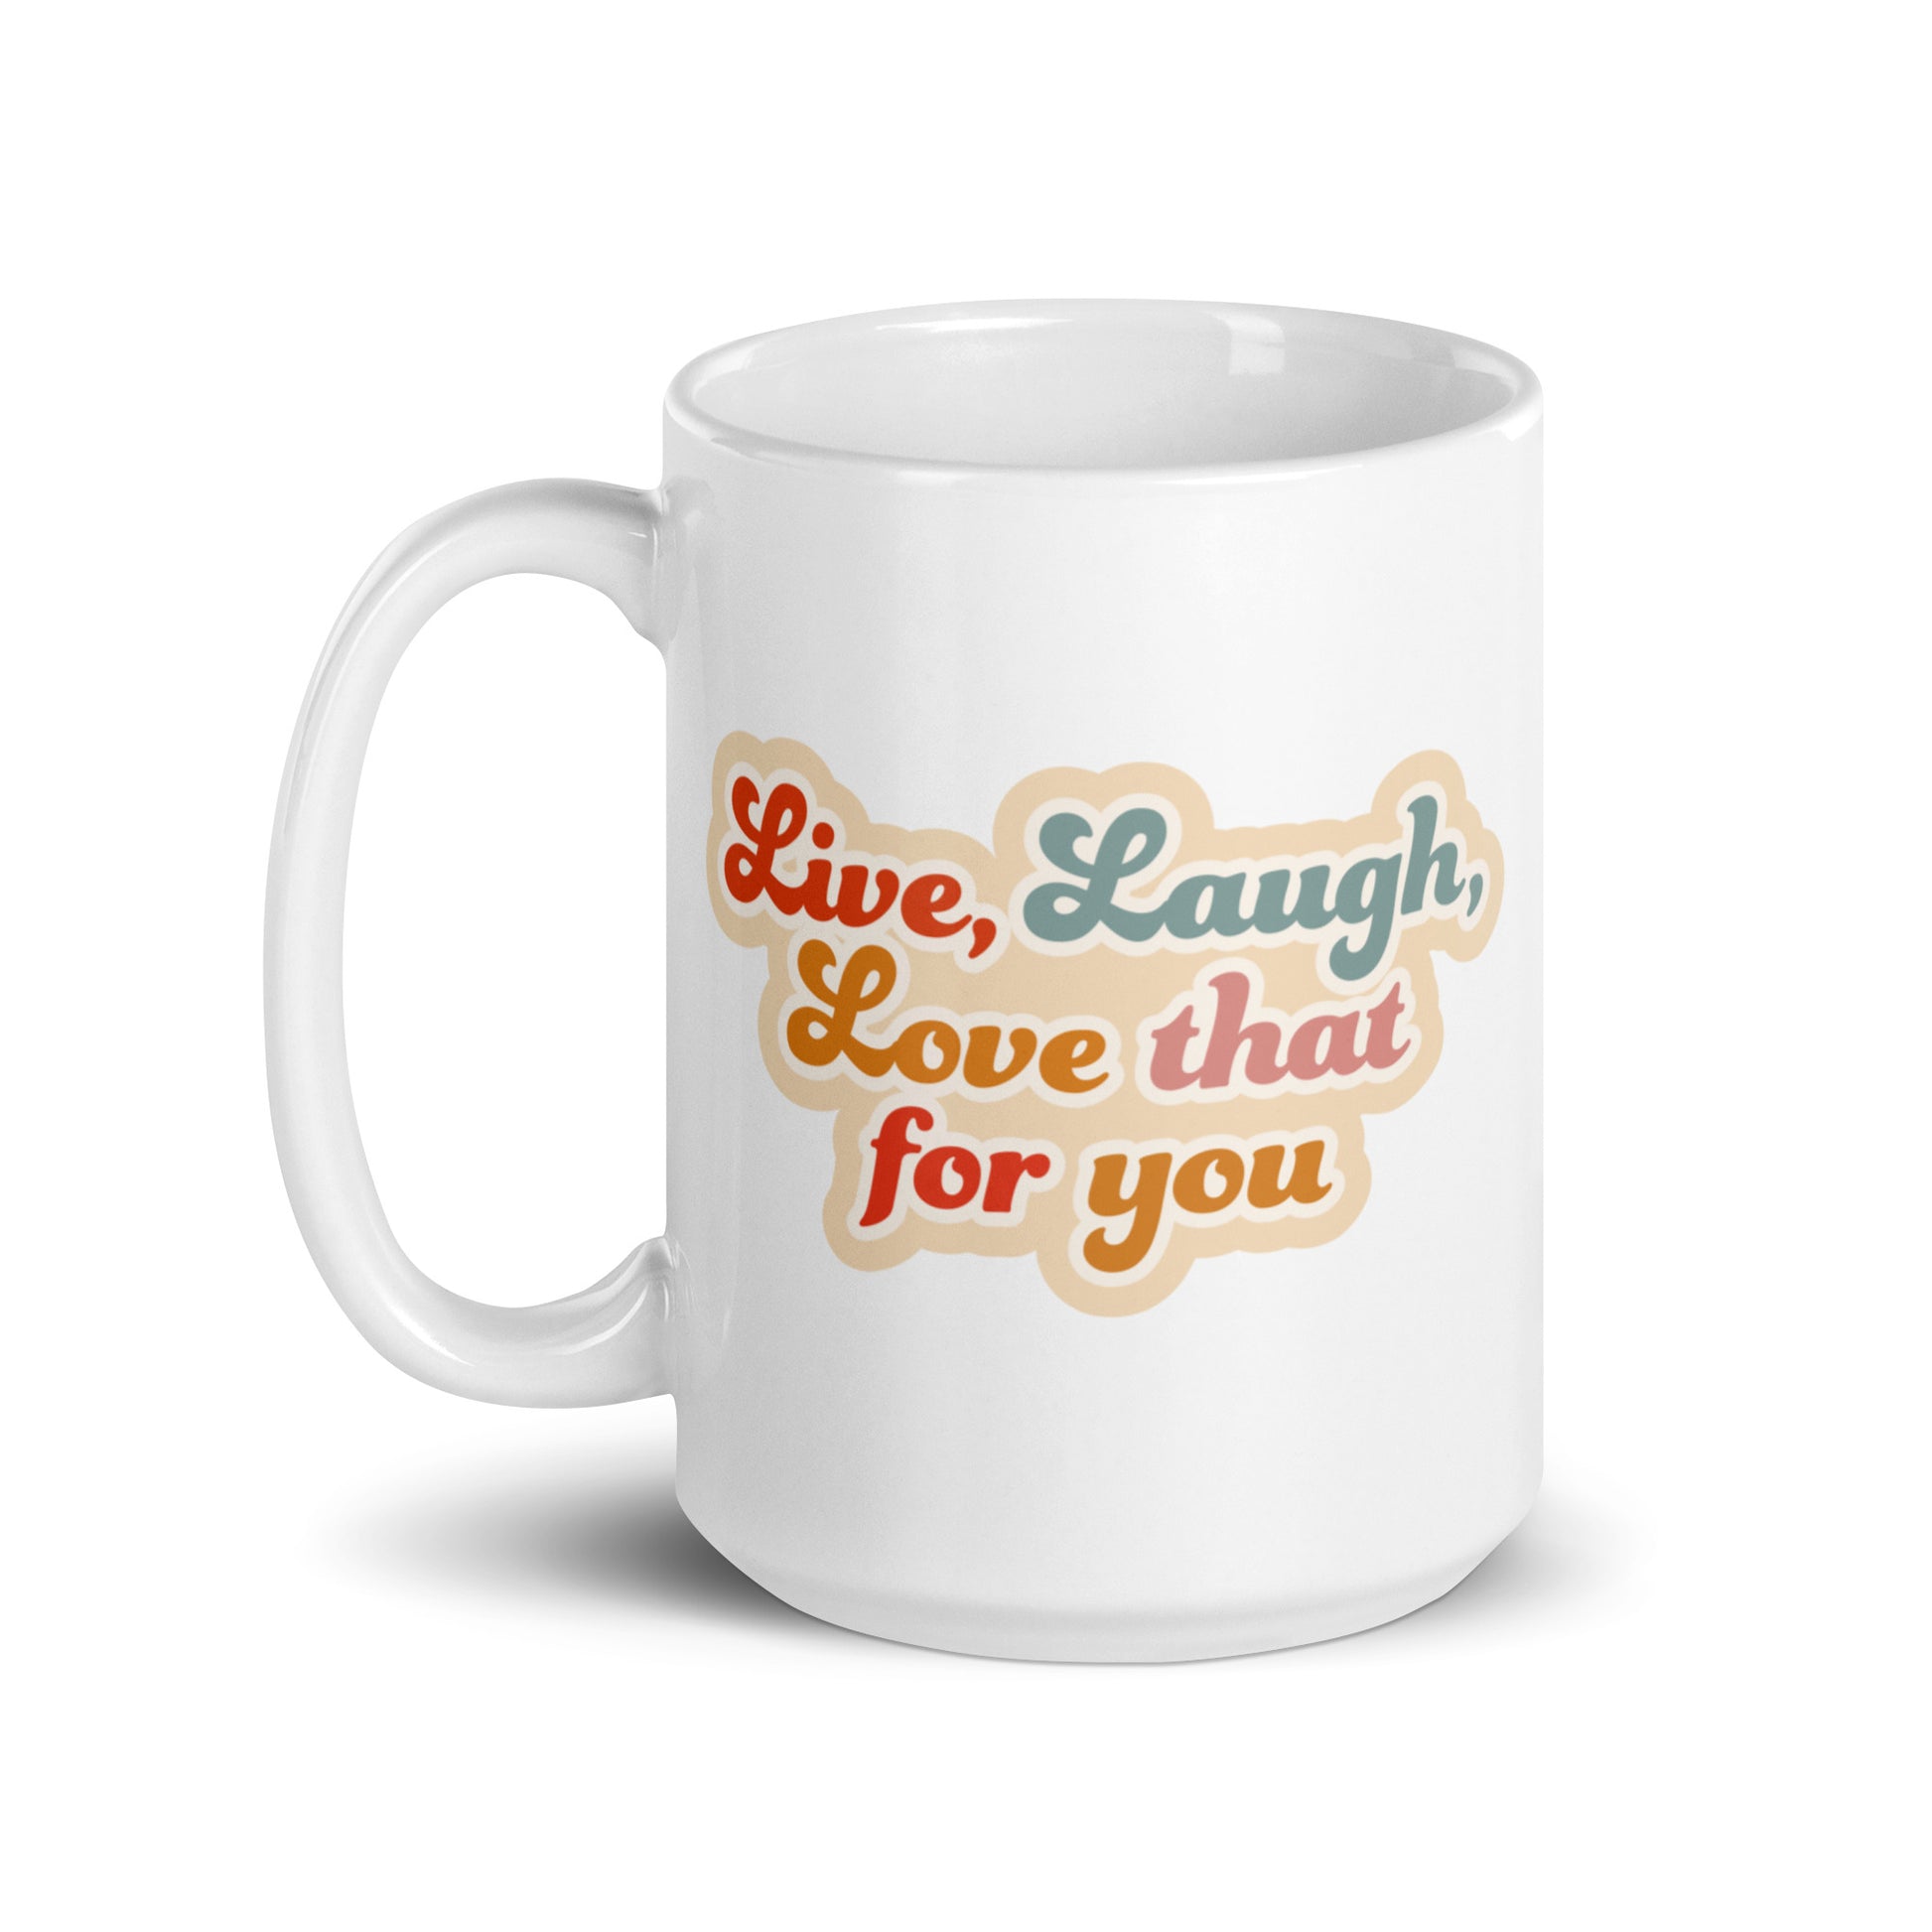 A white 15 ounce cereamic coffee mug featuring colorful, cursive text that reads "Live, Laugh, Love that for you."